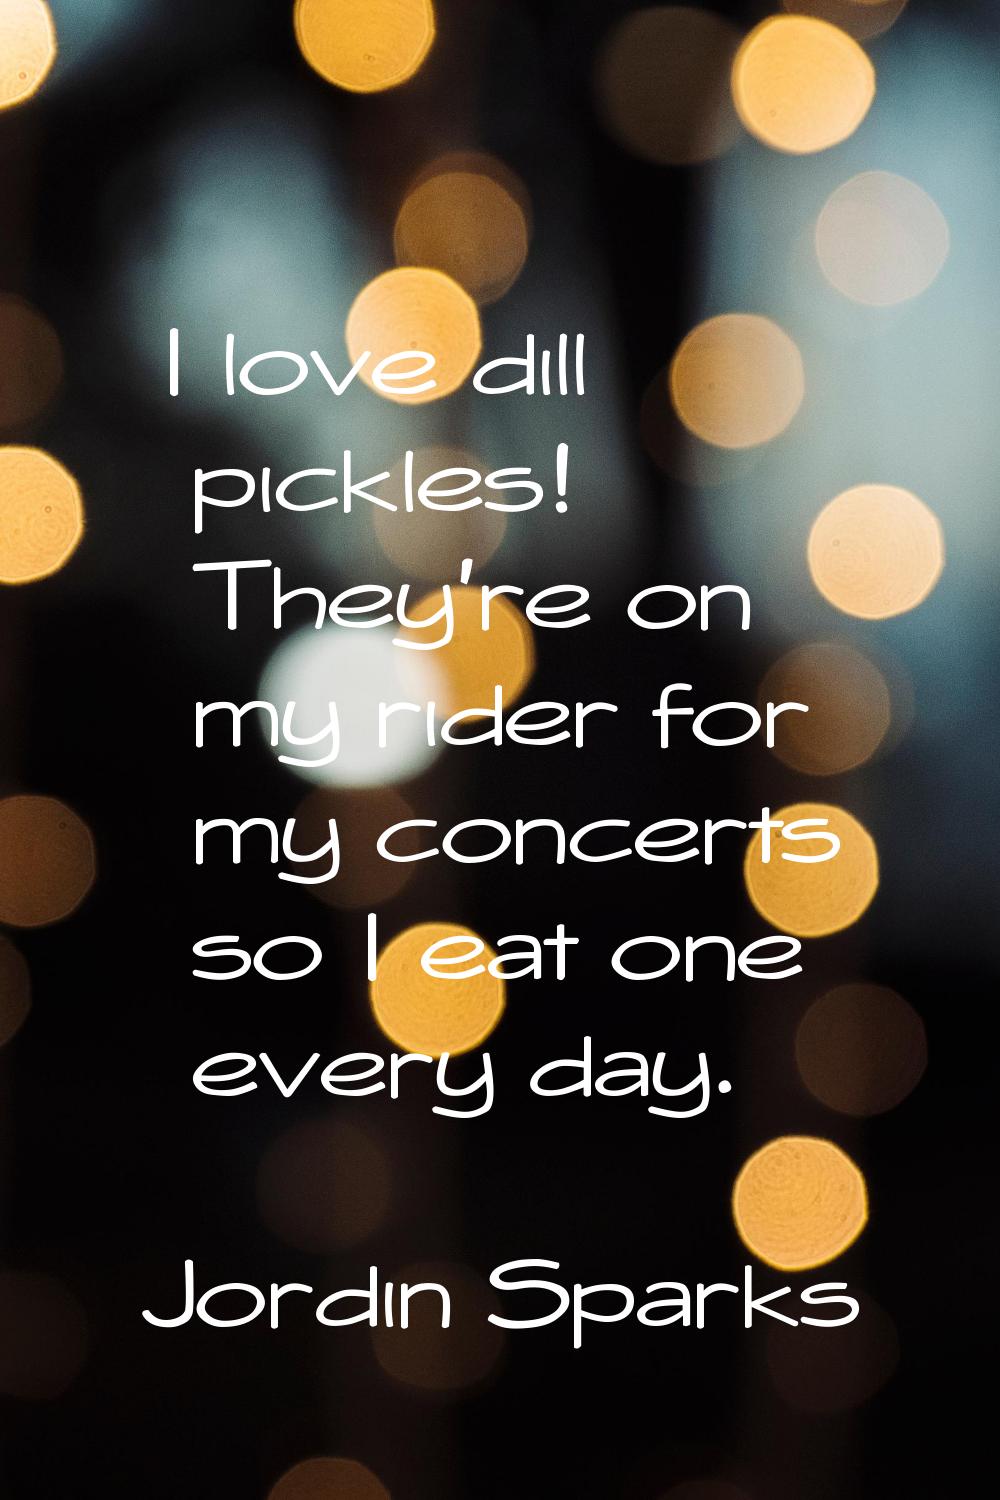 I love dill pickles! They're on my rider for my concerts so I eat one every day.